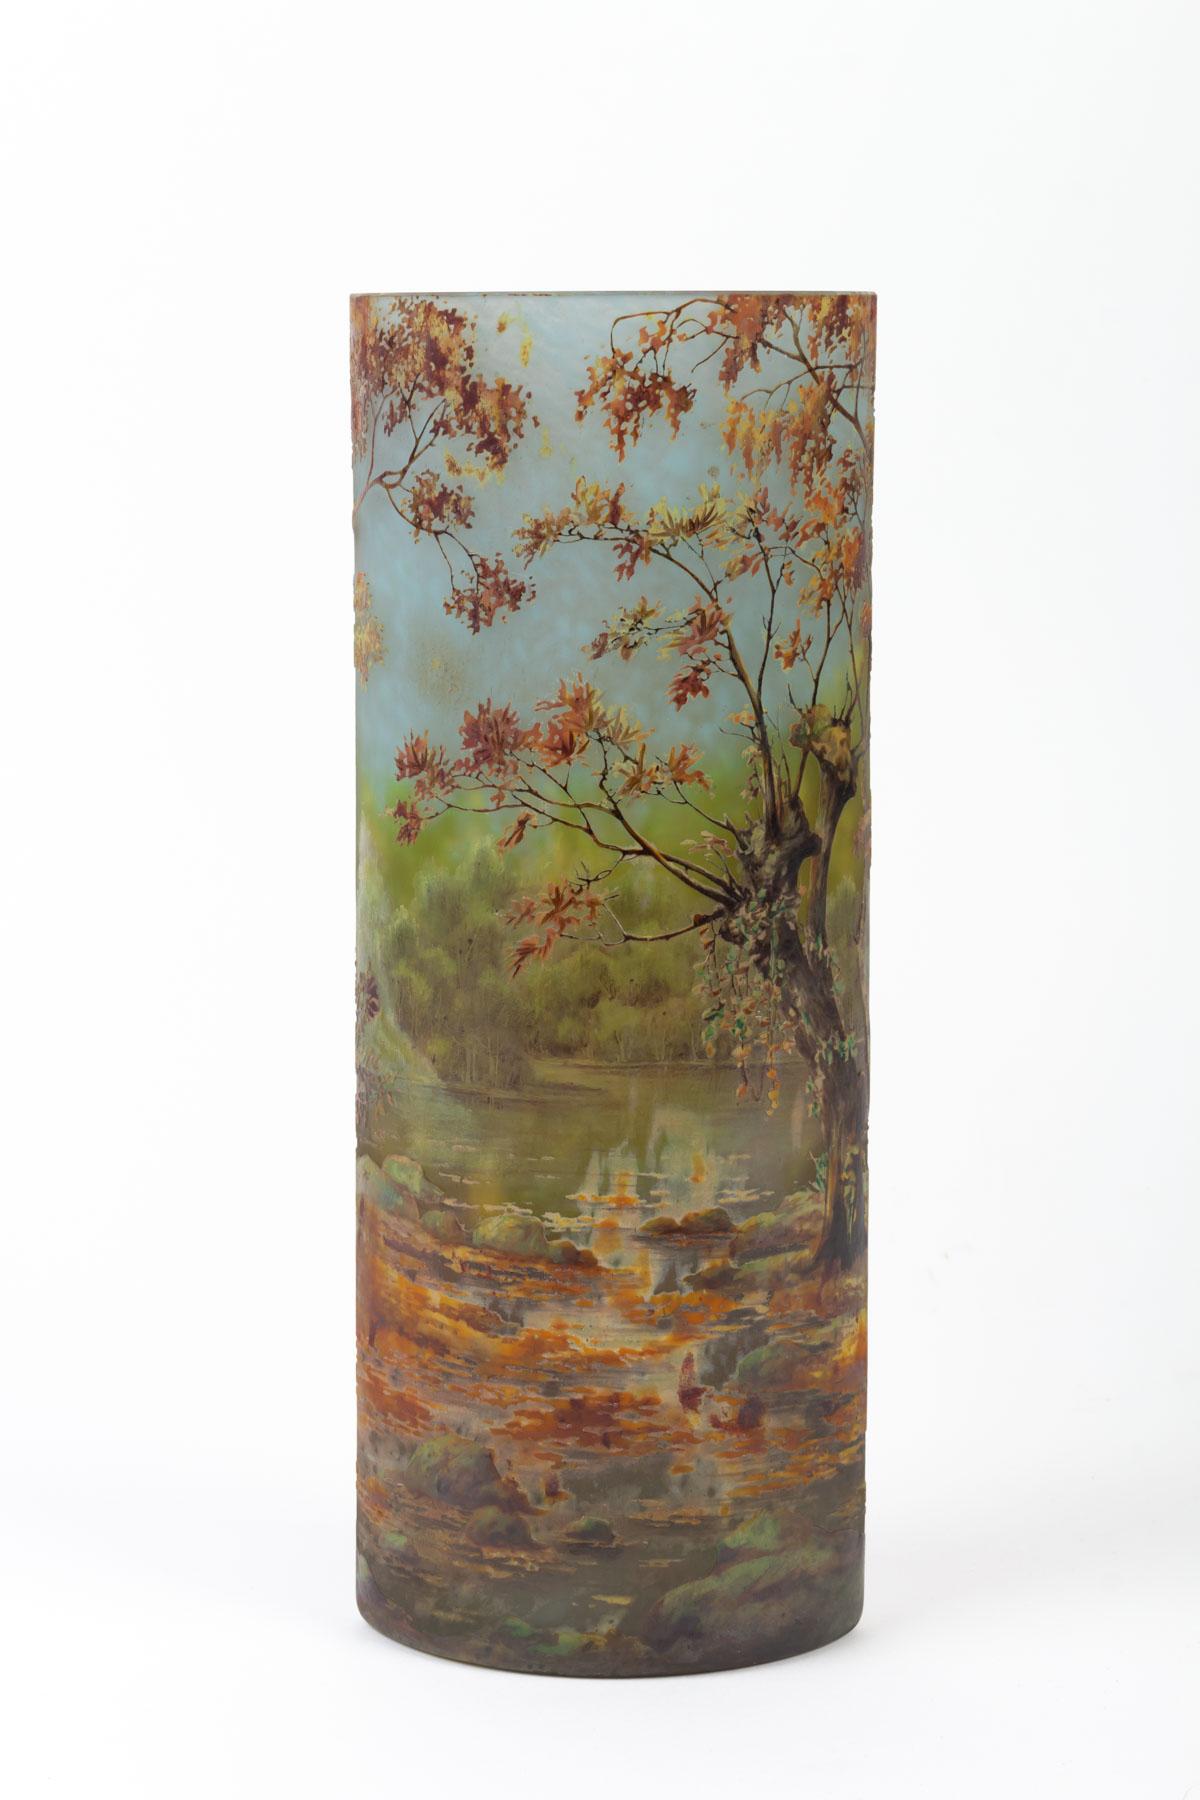 Daum Nancy
Daum Nancy vase roll on pedestal with flared neck and swollen base in multilayer glass decorated with poppies etched in acid, enameled in shades of red and enhanced with gold on a yellow and orange background. Measure: Height 20cm.